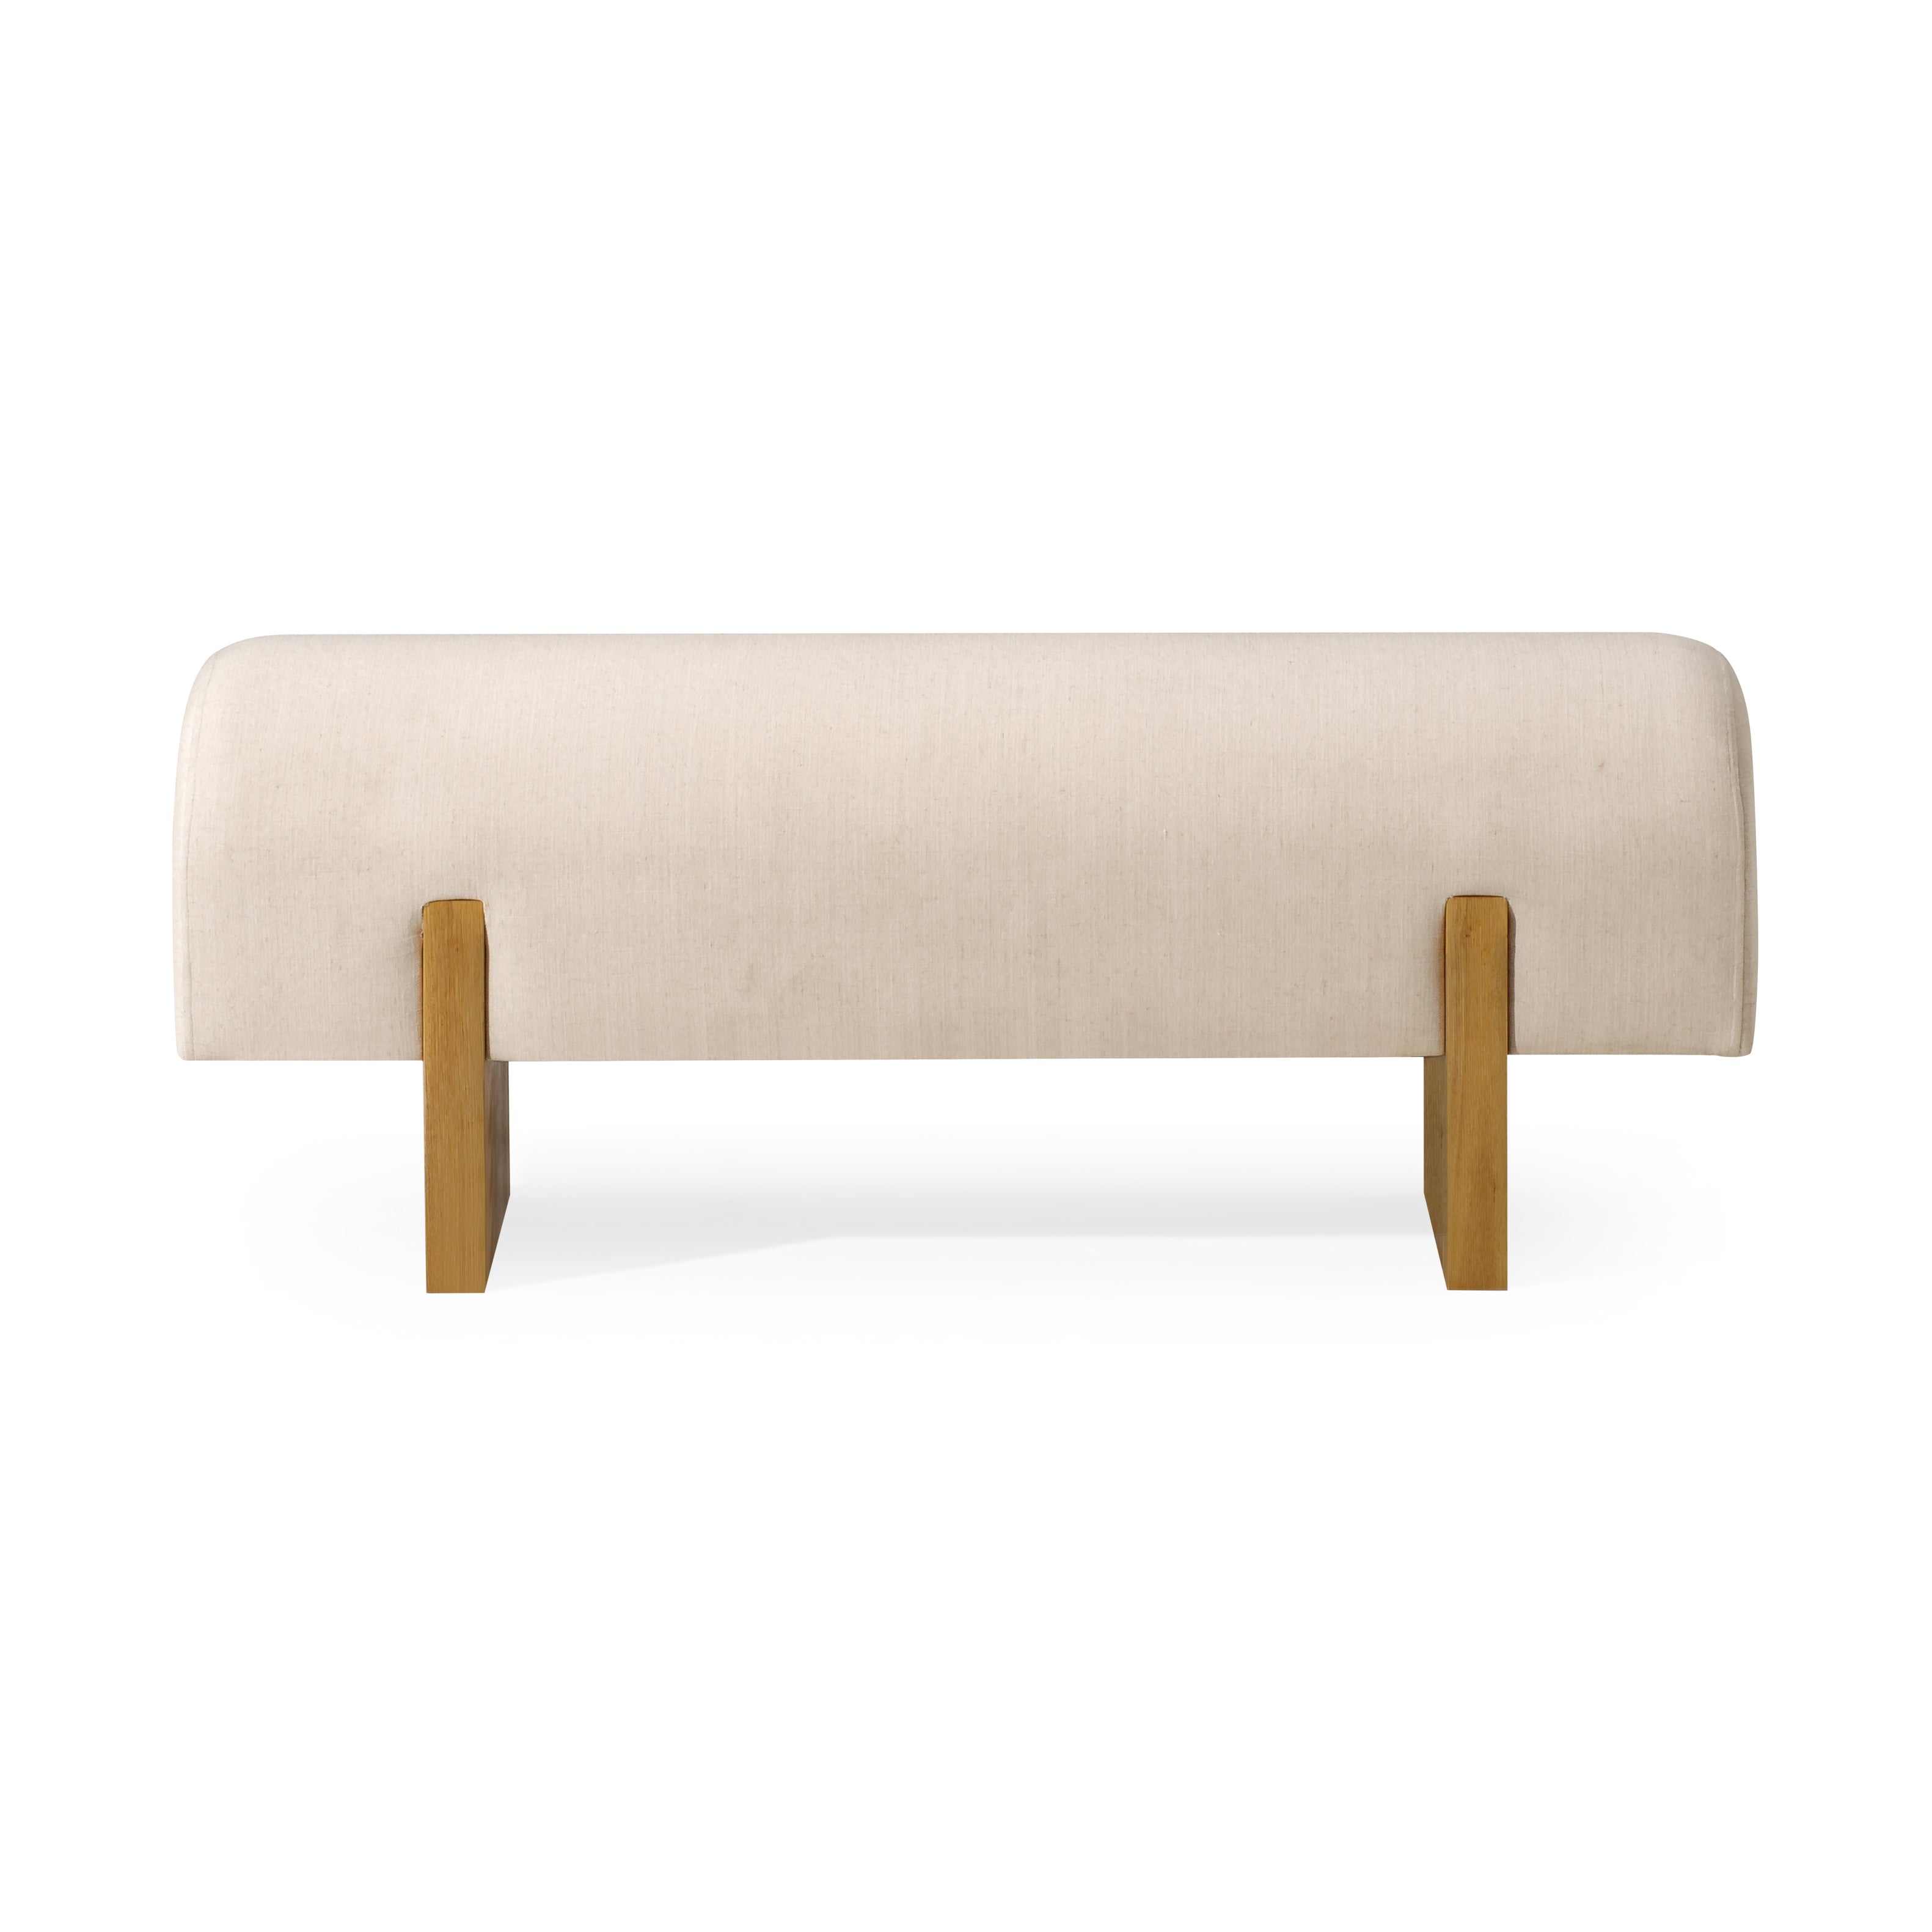 Juno Contemporary Upholstered Wooden Bench in Refined Natural Finish in Ottomans & Benches by Maven Lane